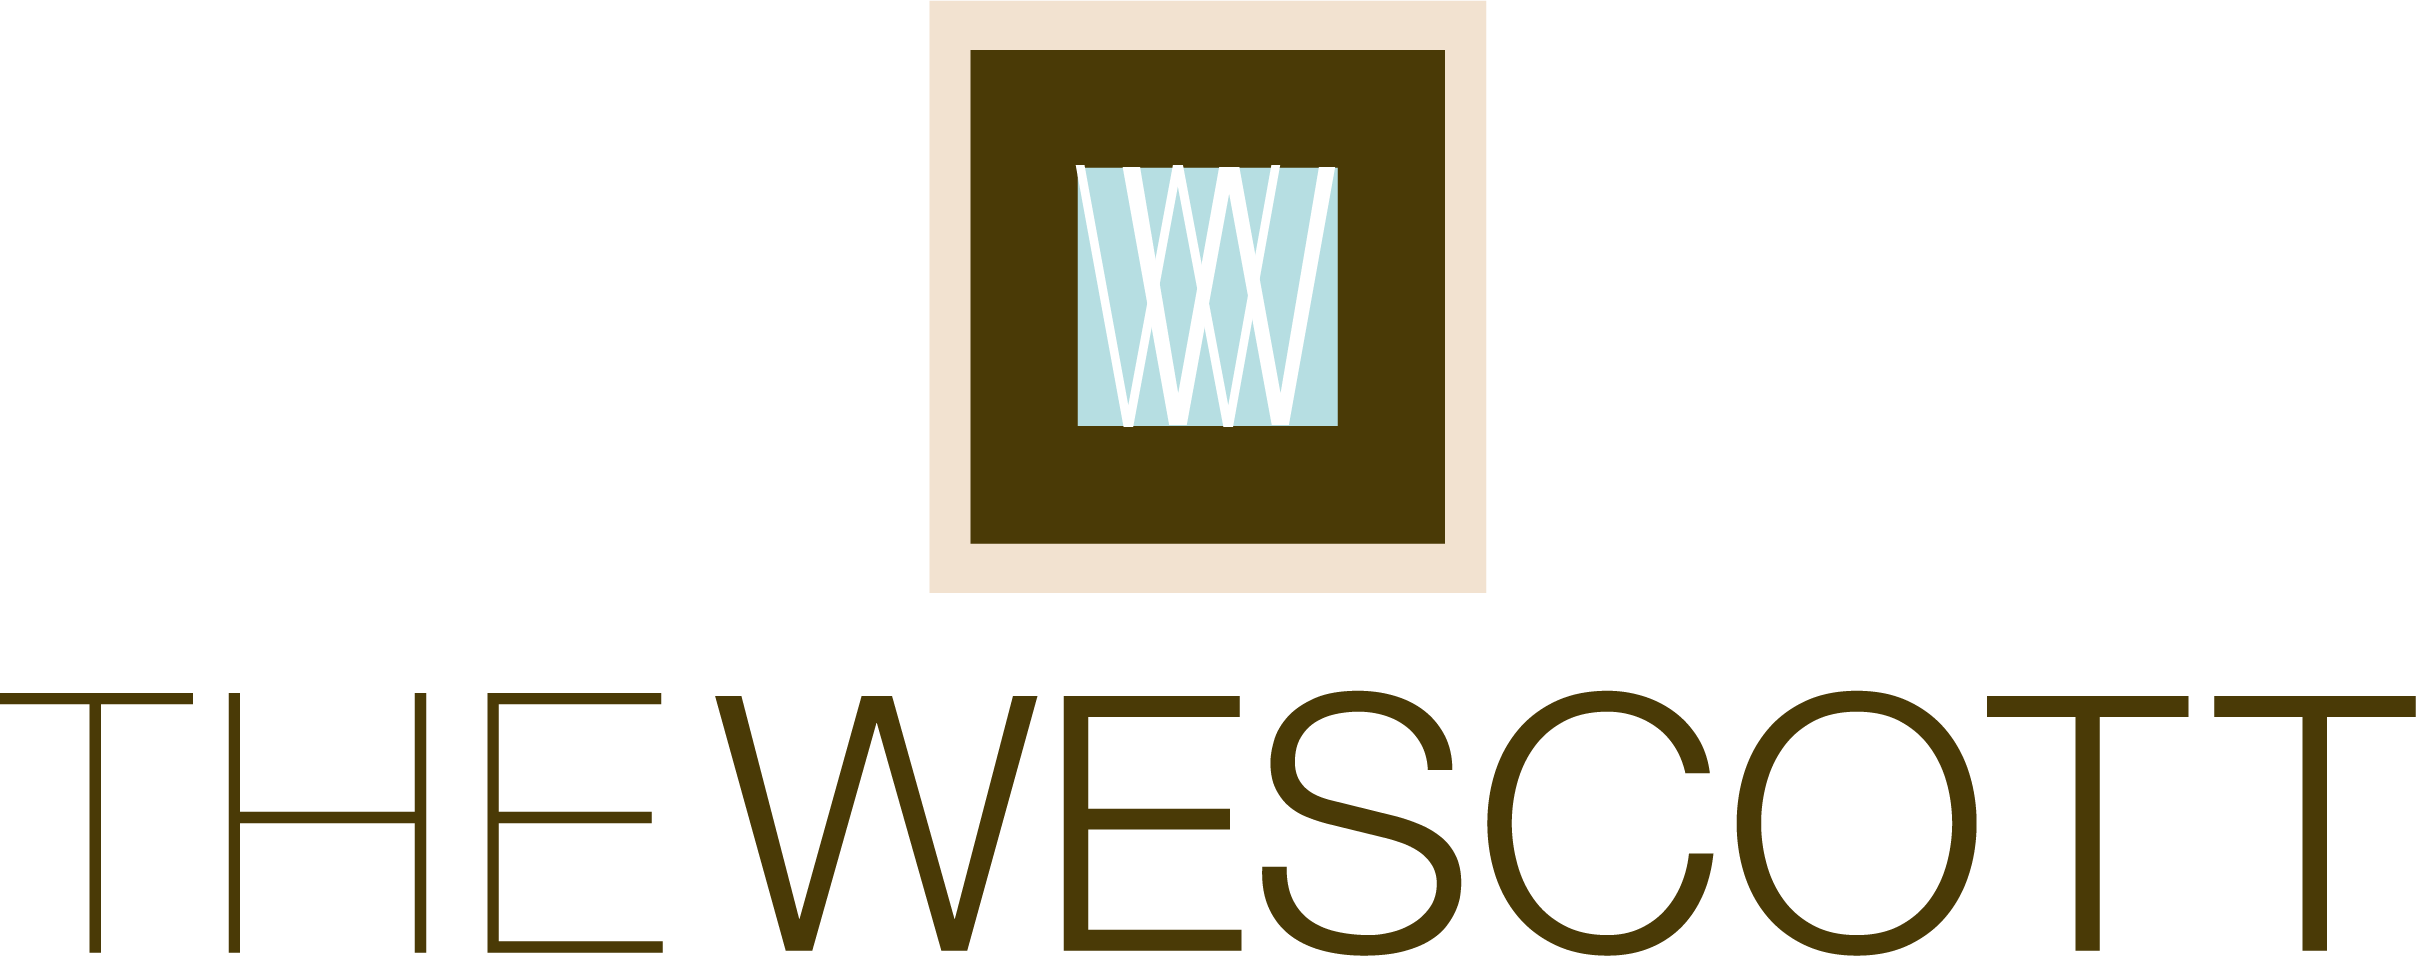 Wescott | Apartments for rent Stamford CT logo